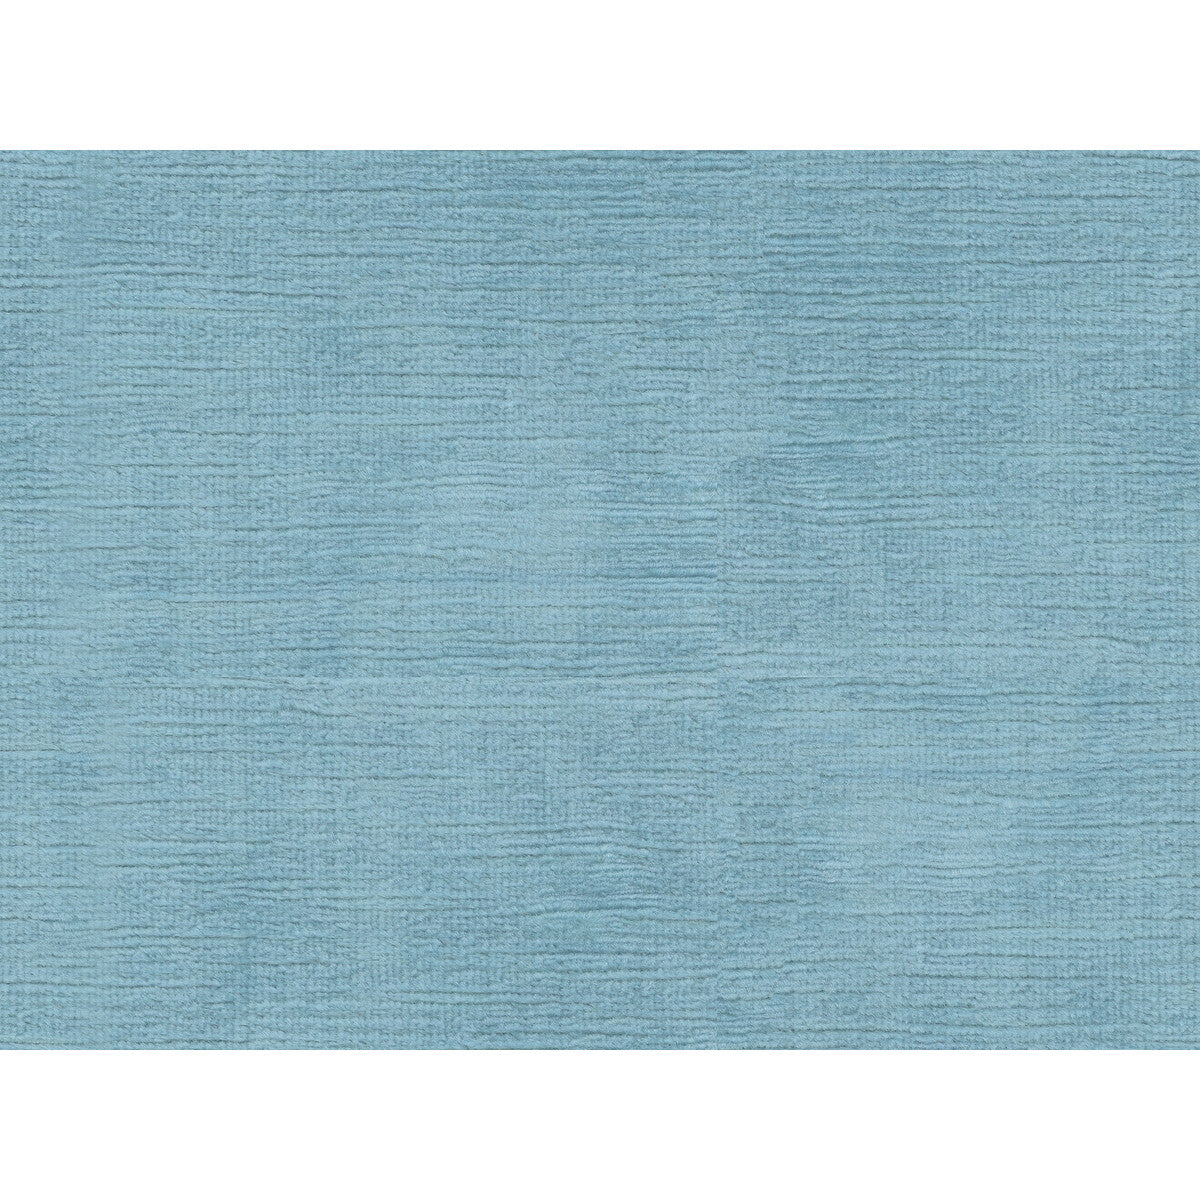 Fulham Linen V fabric in pool color - pattern 2016133.513.0 - by Lee Jofa